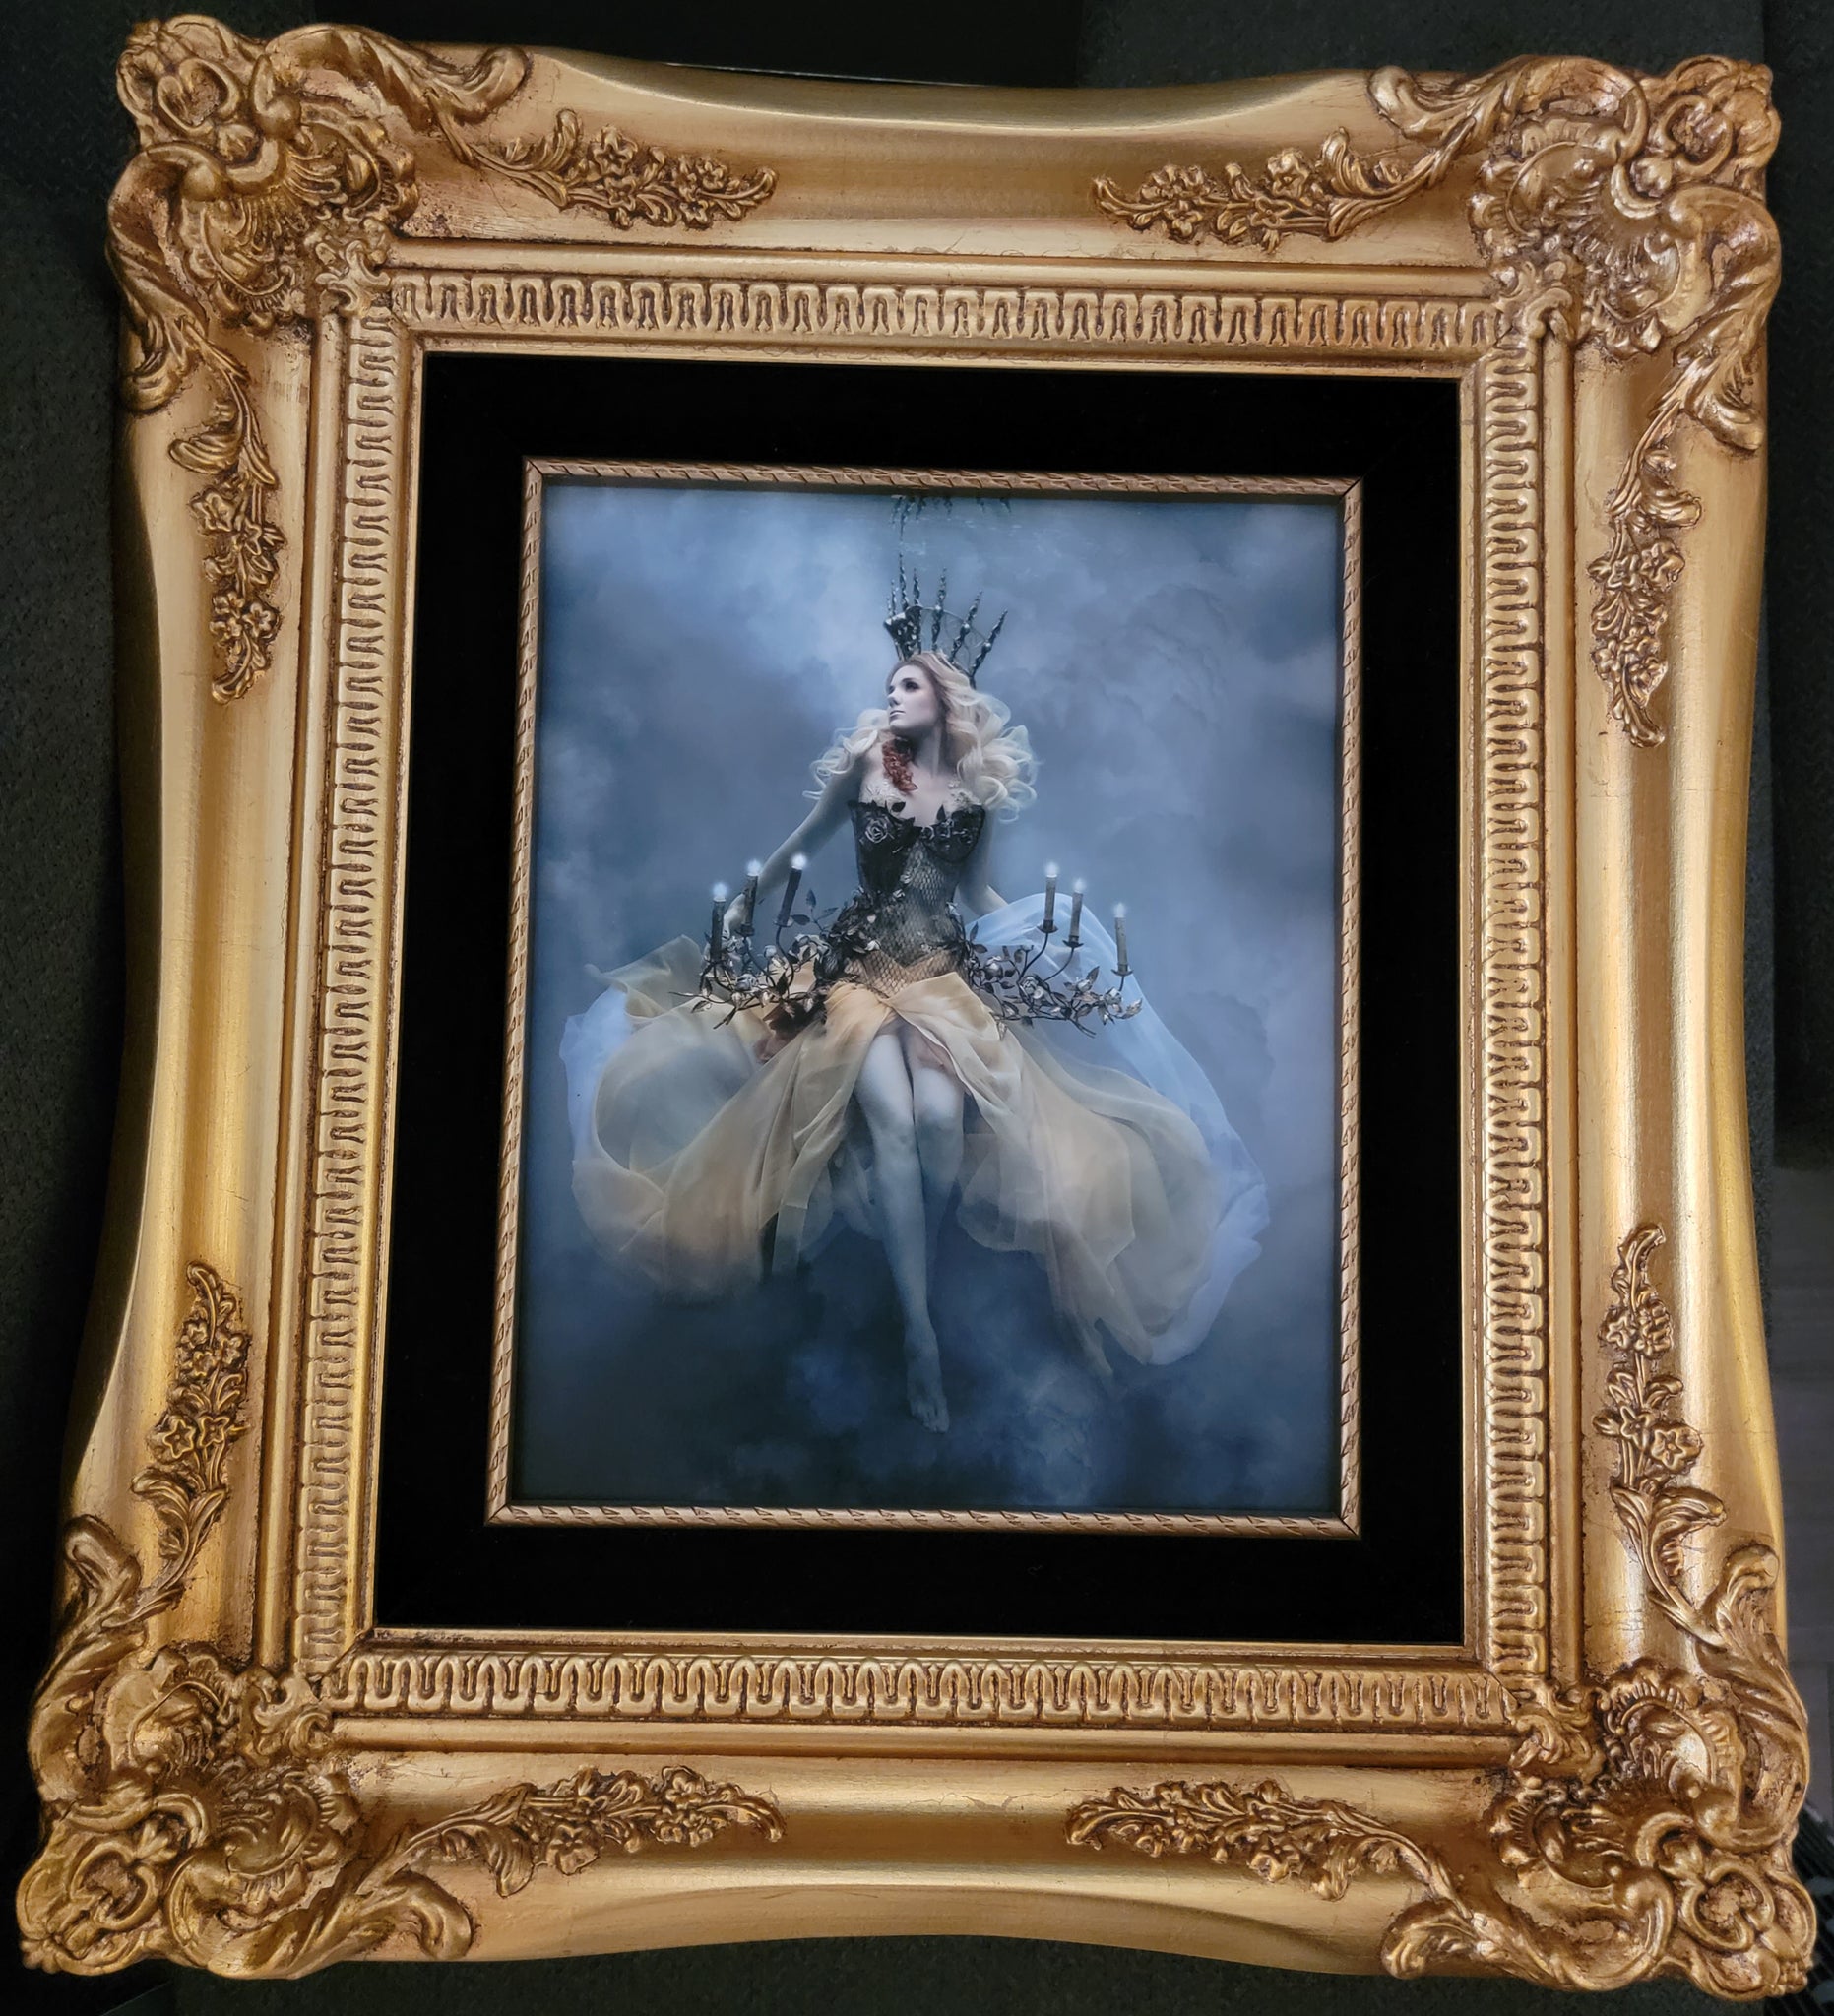 SOLD 8x10 Limited Edition Fine Art Print in Vintage Gold solid wood Frame